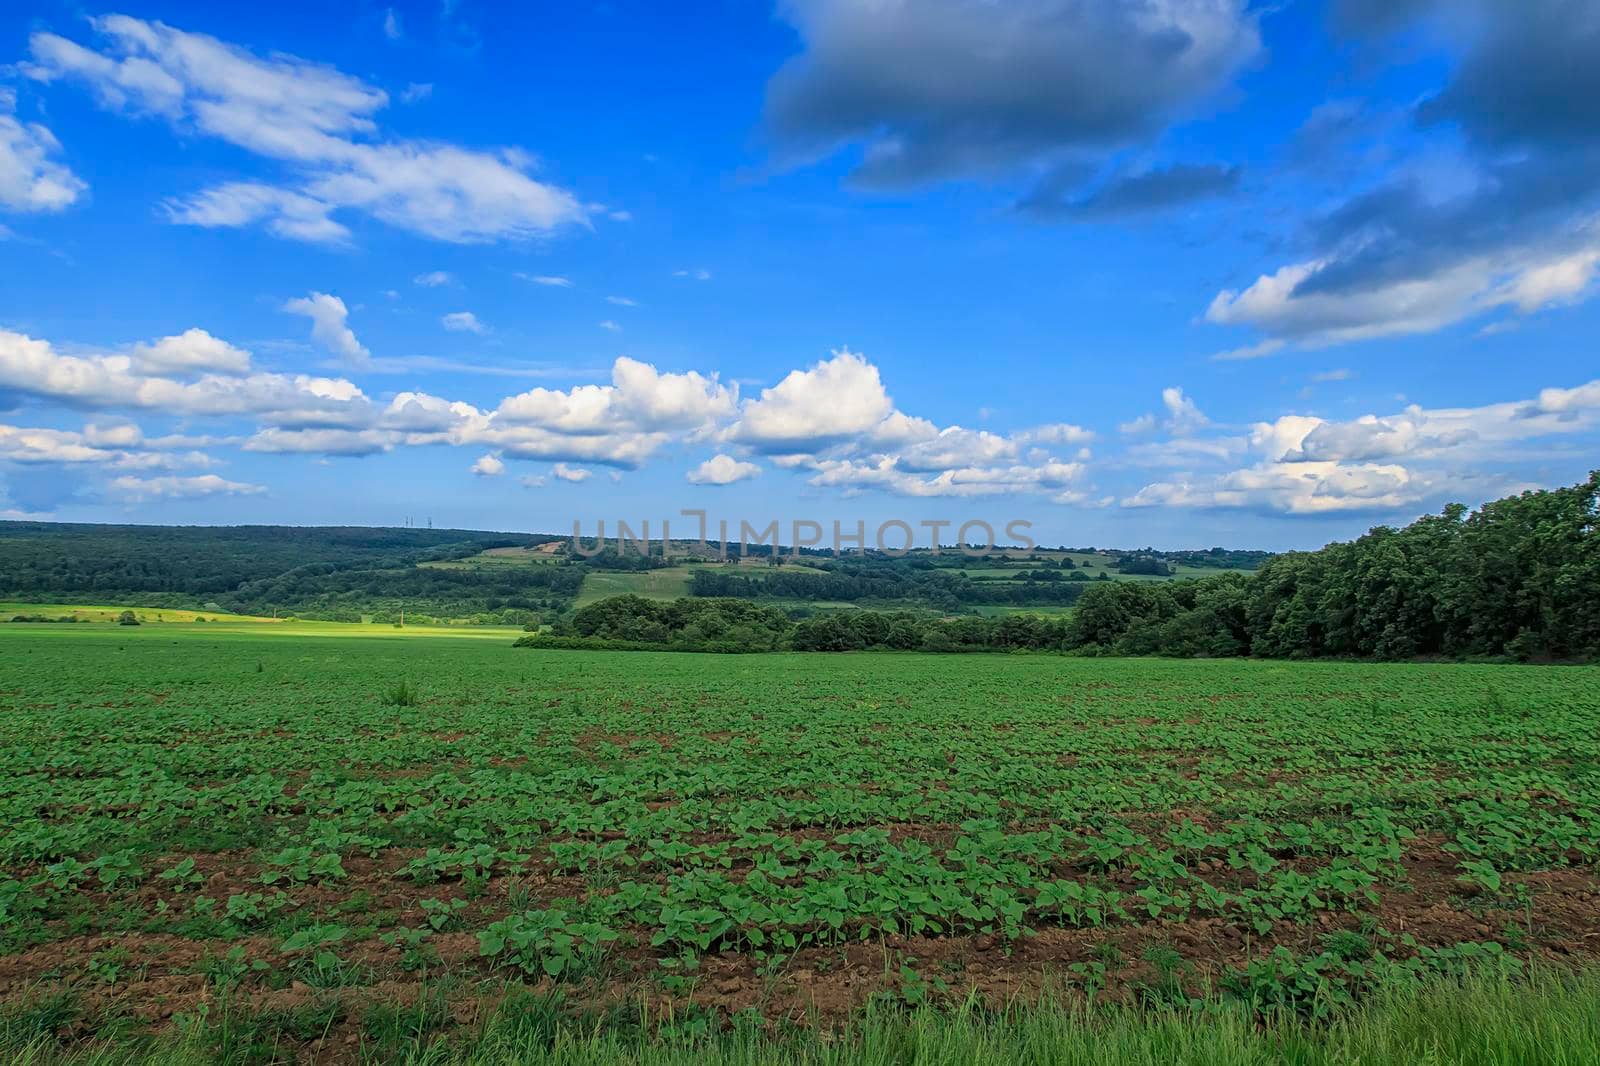 Scenic rural landscape with new agriculture. Beautiful green countryside